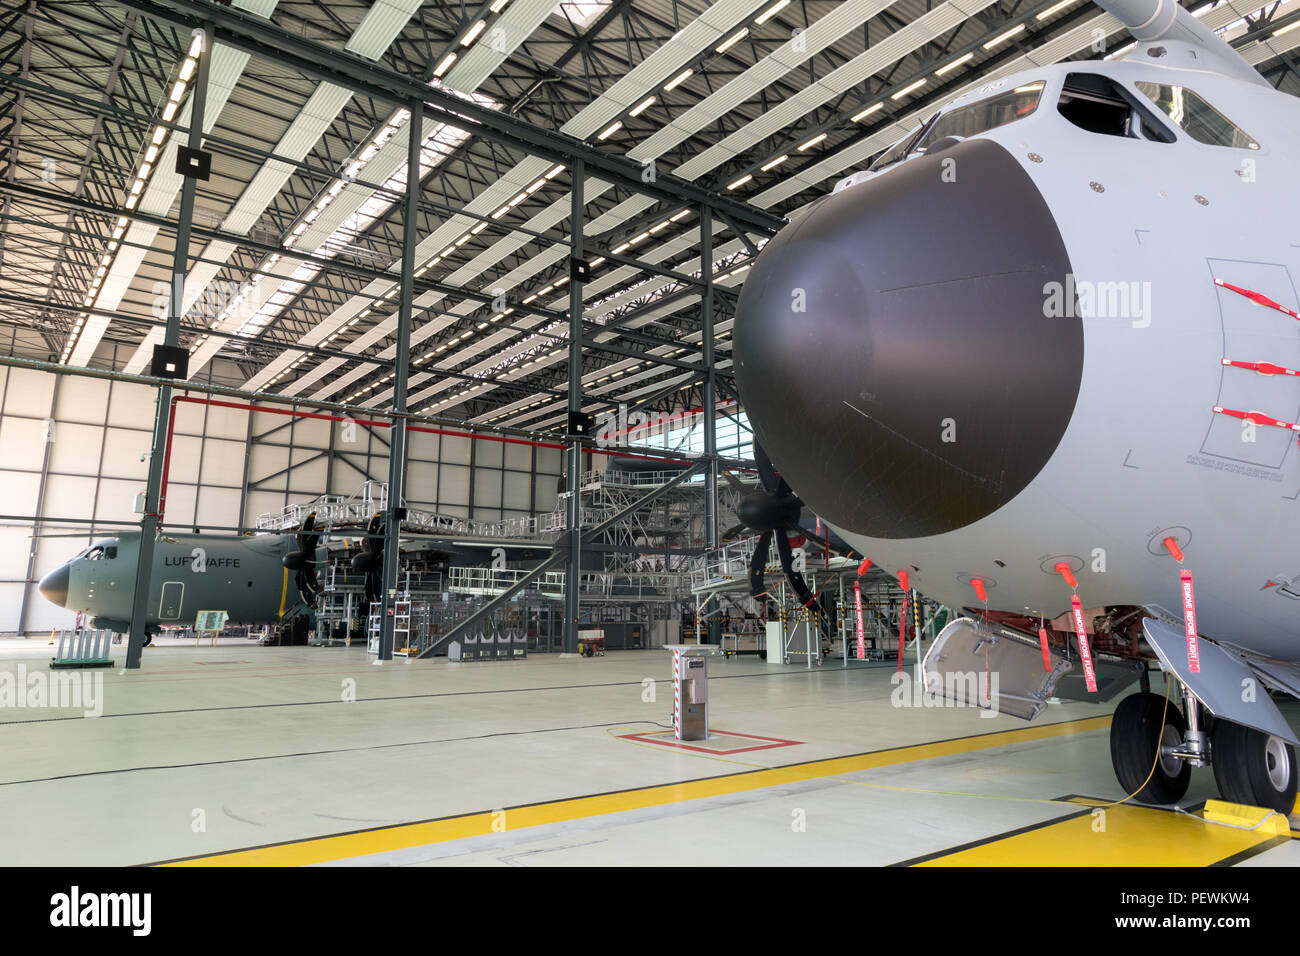 WUNSTORF, GERMANY - JUNE 9, 2018: German Air Force Luftwaffe Airbus A400M military transport planes in a hangar at it`s homebase Wunstorf airbase. Stock Photo